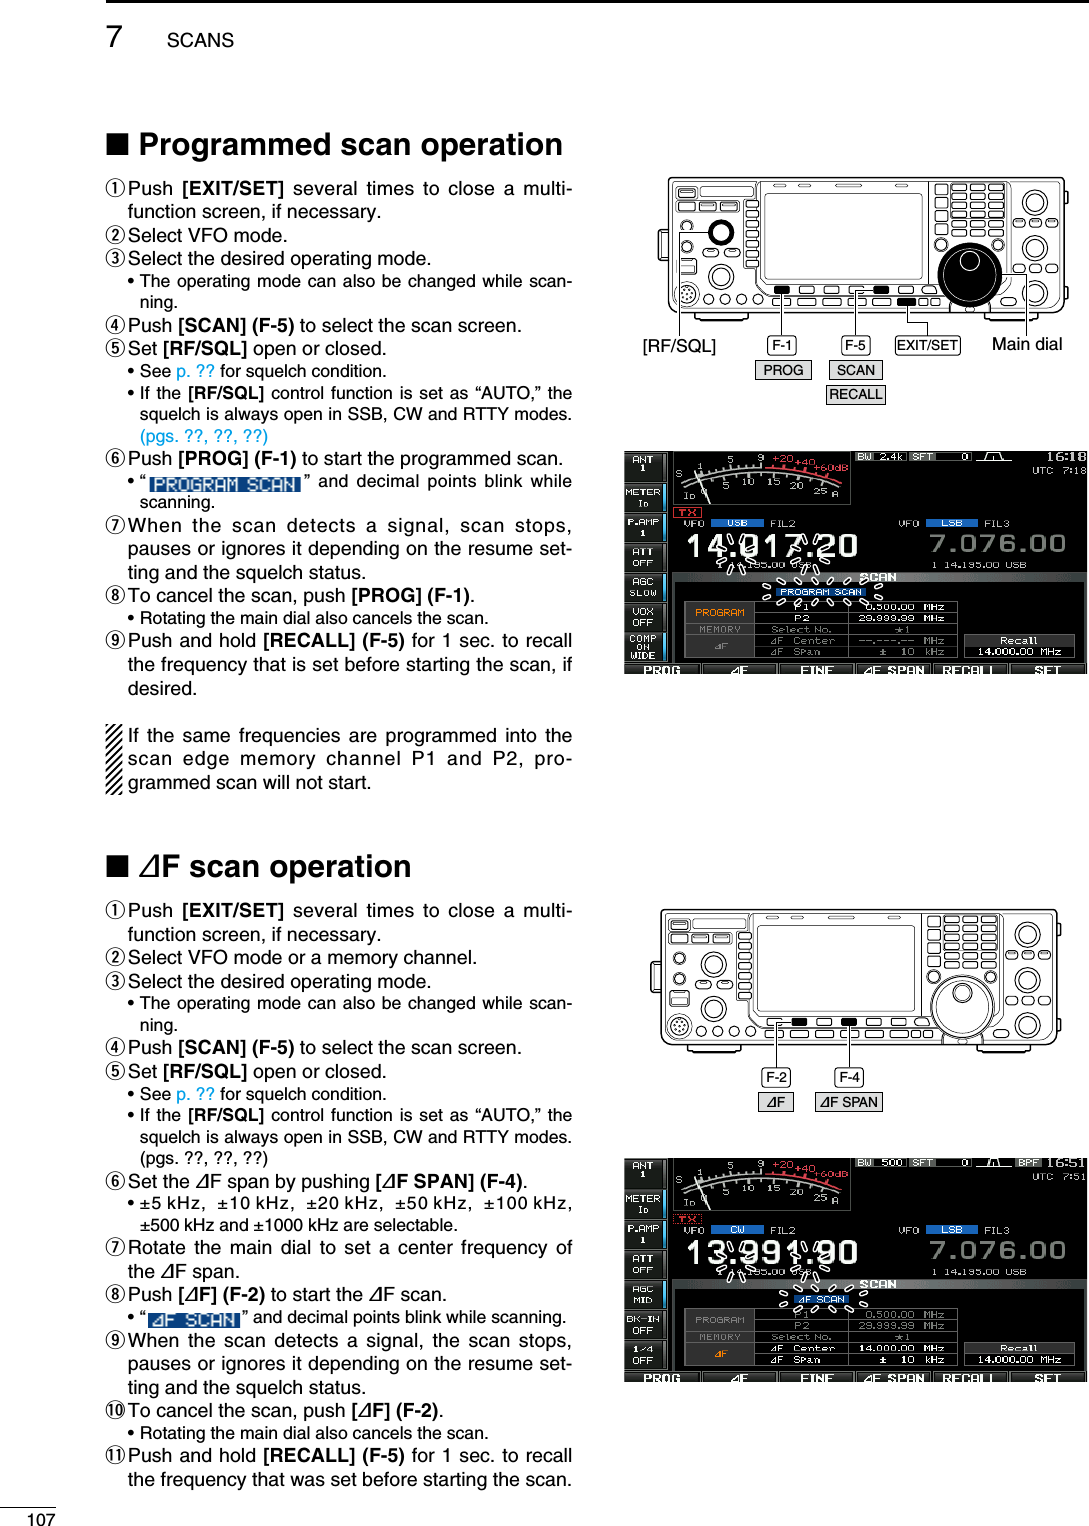 N Programmed scan operationq  Push  [EXIT/SET] several times to close a multi-function screen, if necessary.w Select VFO mode.e Select the desired operating mode. •  The operating mode can also be changed while scan-ning.r Push  [SCAN] (F-5) to select the scan screen.t Set  [RF/SQL] open or closed. • See p. ?? for squelch condition. •  If the [RF/SQL] control function is set as “AUTO,” the squelch is always open in SSB, CW and RTTY modes. (pgs. ??, ??, ??)y Push  [PROG] (F-1) to start the programmed scan. •  “    ” and decimal points blink while scanning.u  When the scan detects a signal, scan stops, pauses or ignores it depending on the resume set-ting and the squelch status.i To cancel the scan, push [PROG] (F-1).  • Rotating the main dial also cancels the scan.o  Push and hold [RECALL] (F-5) for 1 sec. to recall the frequency that is set before starting the scan, if desired.If the same frequencies are programmed into the scan edge memory channel P1 and P2, pro-grammed scan will not start.N ∂F scan operationq  Push  [EXIT/SET] several times to close a multi-function screen, if necessary.w Select VFO mode or a memory channel.e Select the desired operating mode. •  The operating mode can also be changed while scan-ning.r Push  [SCAN] (F-5) to select the scan screen.t Set  [RF/SQL] open or closed. • See p. ?? for squelch condition. •  If the [RF/SQL] control function is set as “AUTO,” the squelch is always open in SSB, CW and RTTY modes. (pgs. ??, ??, ??)y Set  the  ∂F span by pushing [∂F SPAN] (F-4). •  ±5 kHz,  ±10 kHz,  ±20 kHz,  ±50 kHz,  ±100 kHz, ±500 kHz and ±1000 kHz are selectable.u  Rotate the main dial to set a center frequency of the ∂F span.i Push  [∂F] (F-2) to start the ∂F scan. •  “   ” and decimal points blink while scanning.o  When the scan detects a signal, the scan stops, pauses or ignores it depending on the resume set-ting and the squelch status.!0 To cancel the scan, push [∂F] (F-2).  • Rotating the main dial also cancels the scan.!1  Push and hold [RECALL] (F-5) for 1 sec. to recall the frequency that was set before starting the scan.F-1 F-5 EXIT/SET Main dial[RF/SQL]PROG SCANRECALLF-2 F-4∂F SPAN∂F1077SCANS